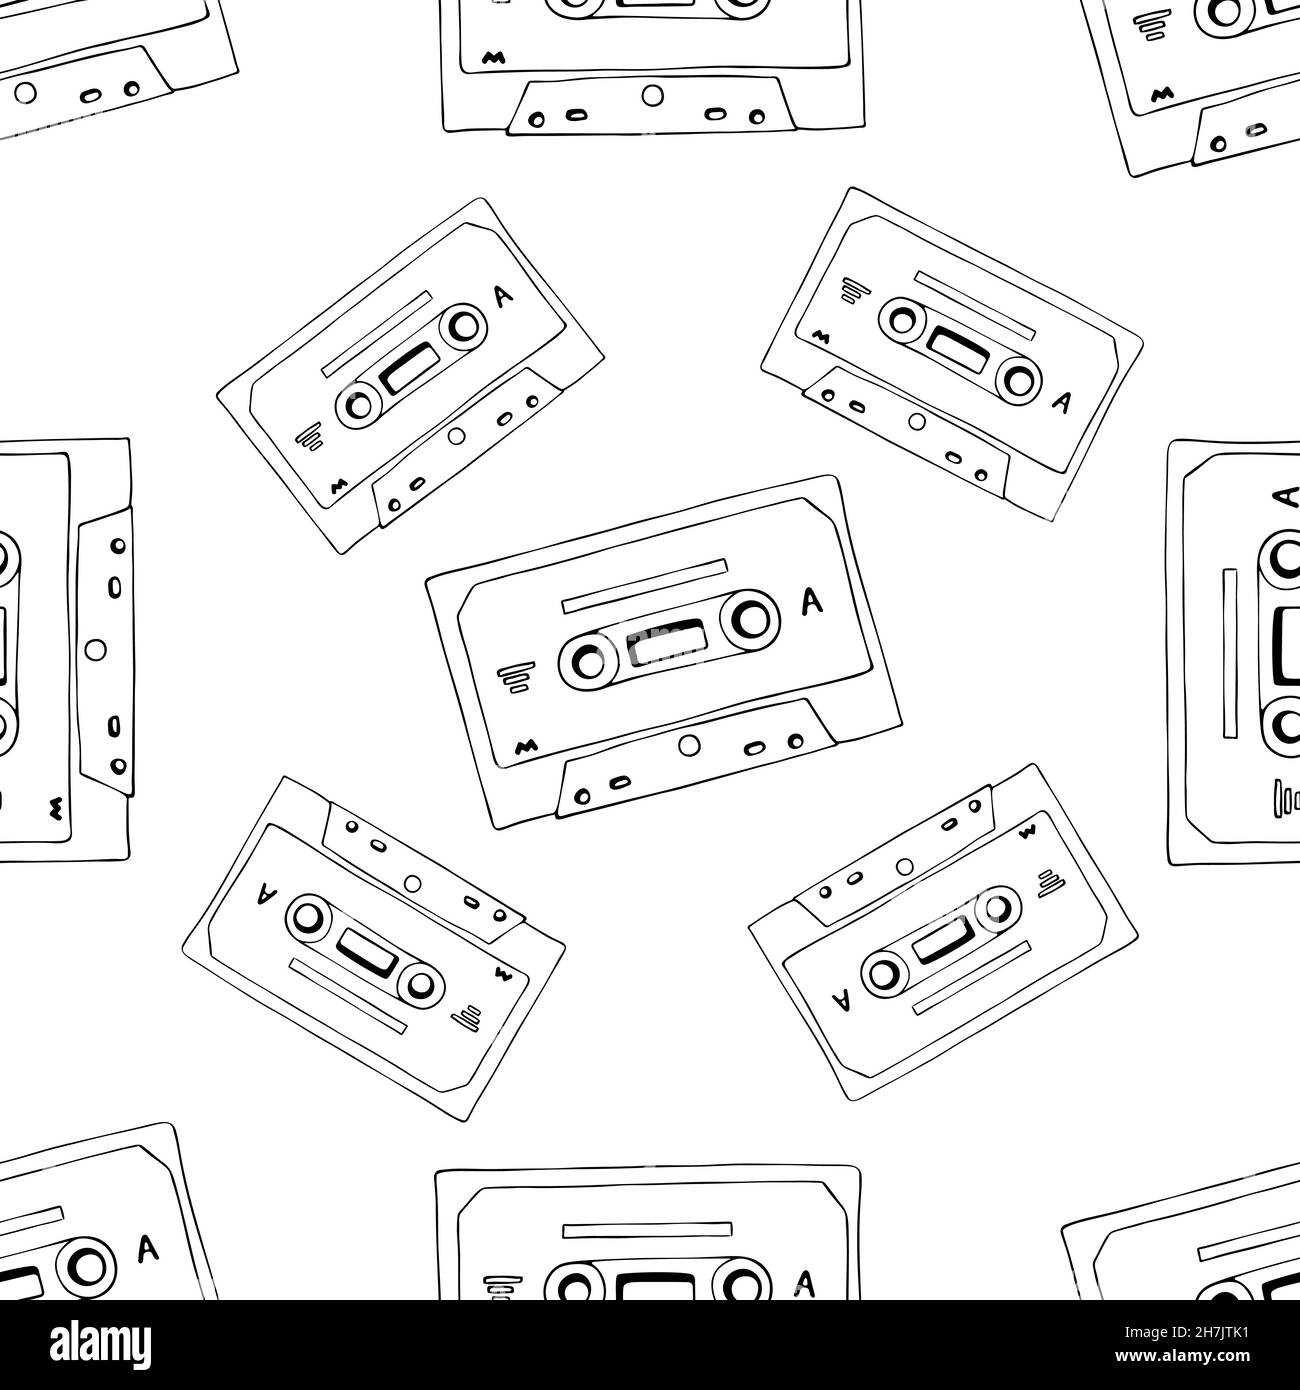 Hand drawn cassette and mixtape seamless pattern, black and white cartoon doodle background for music technology or audio equipment concept. Stock Vector